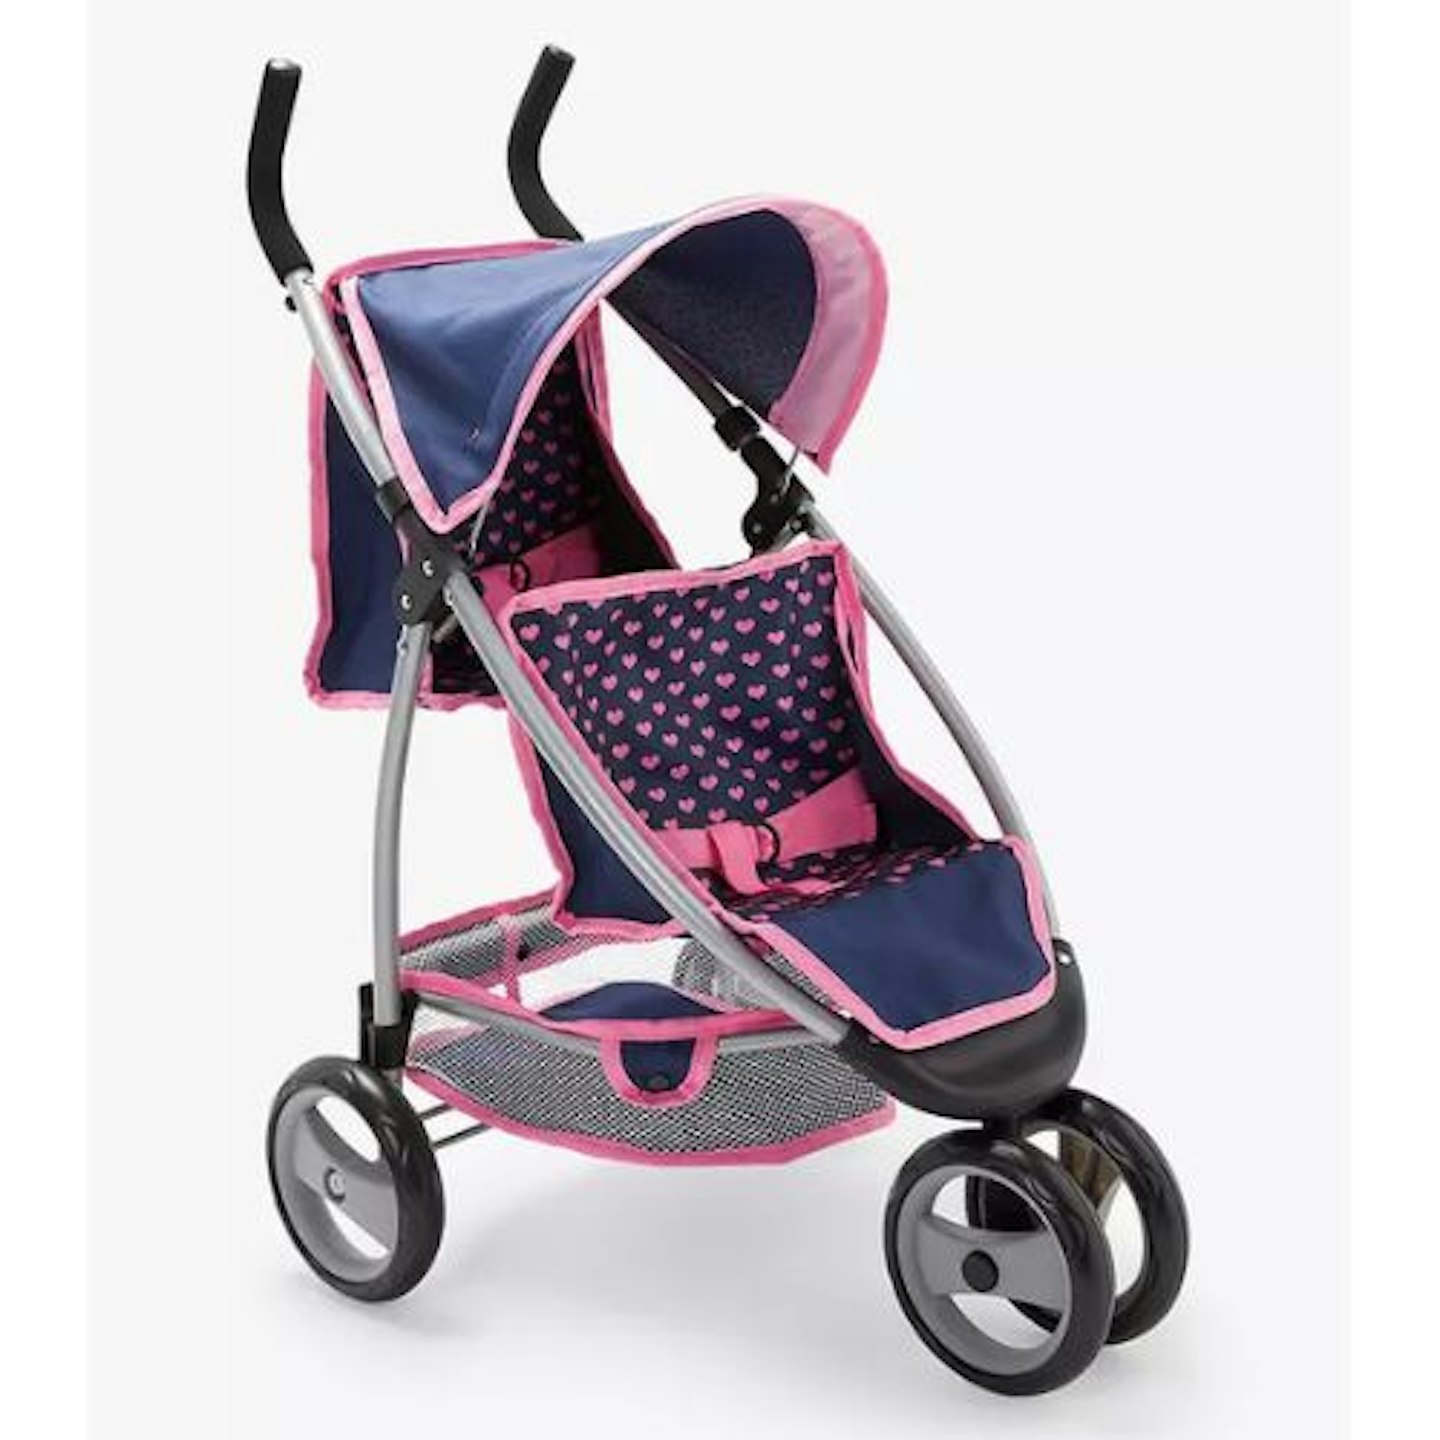 John Lewis & Partners Baby Doll Twin Pushchair